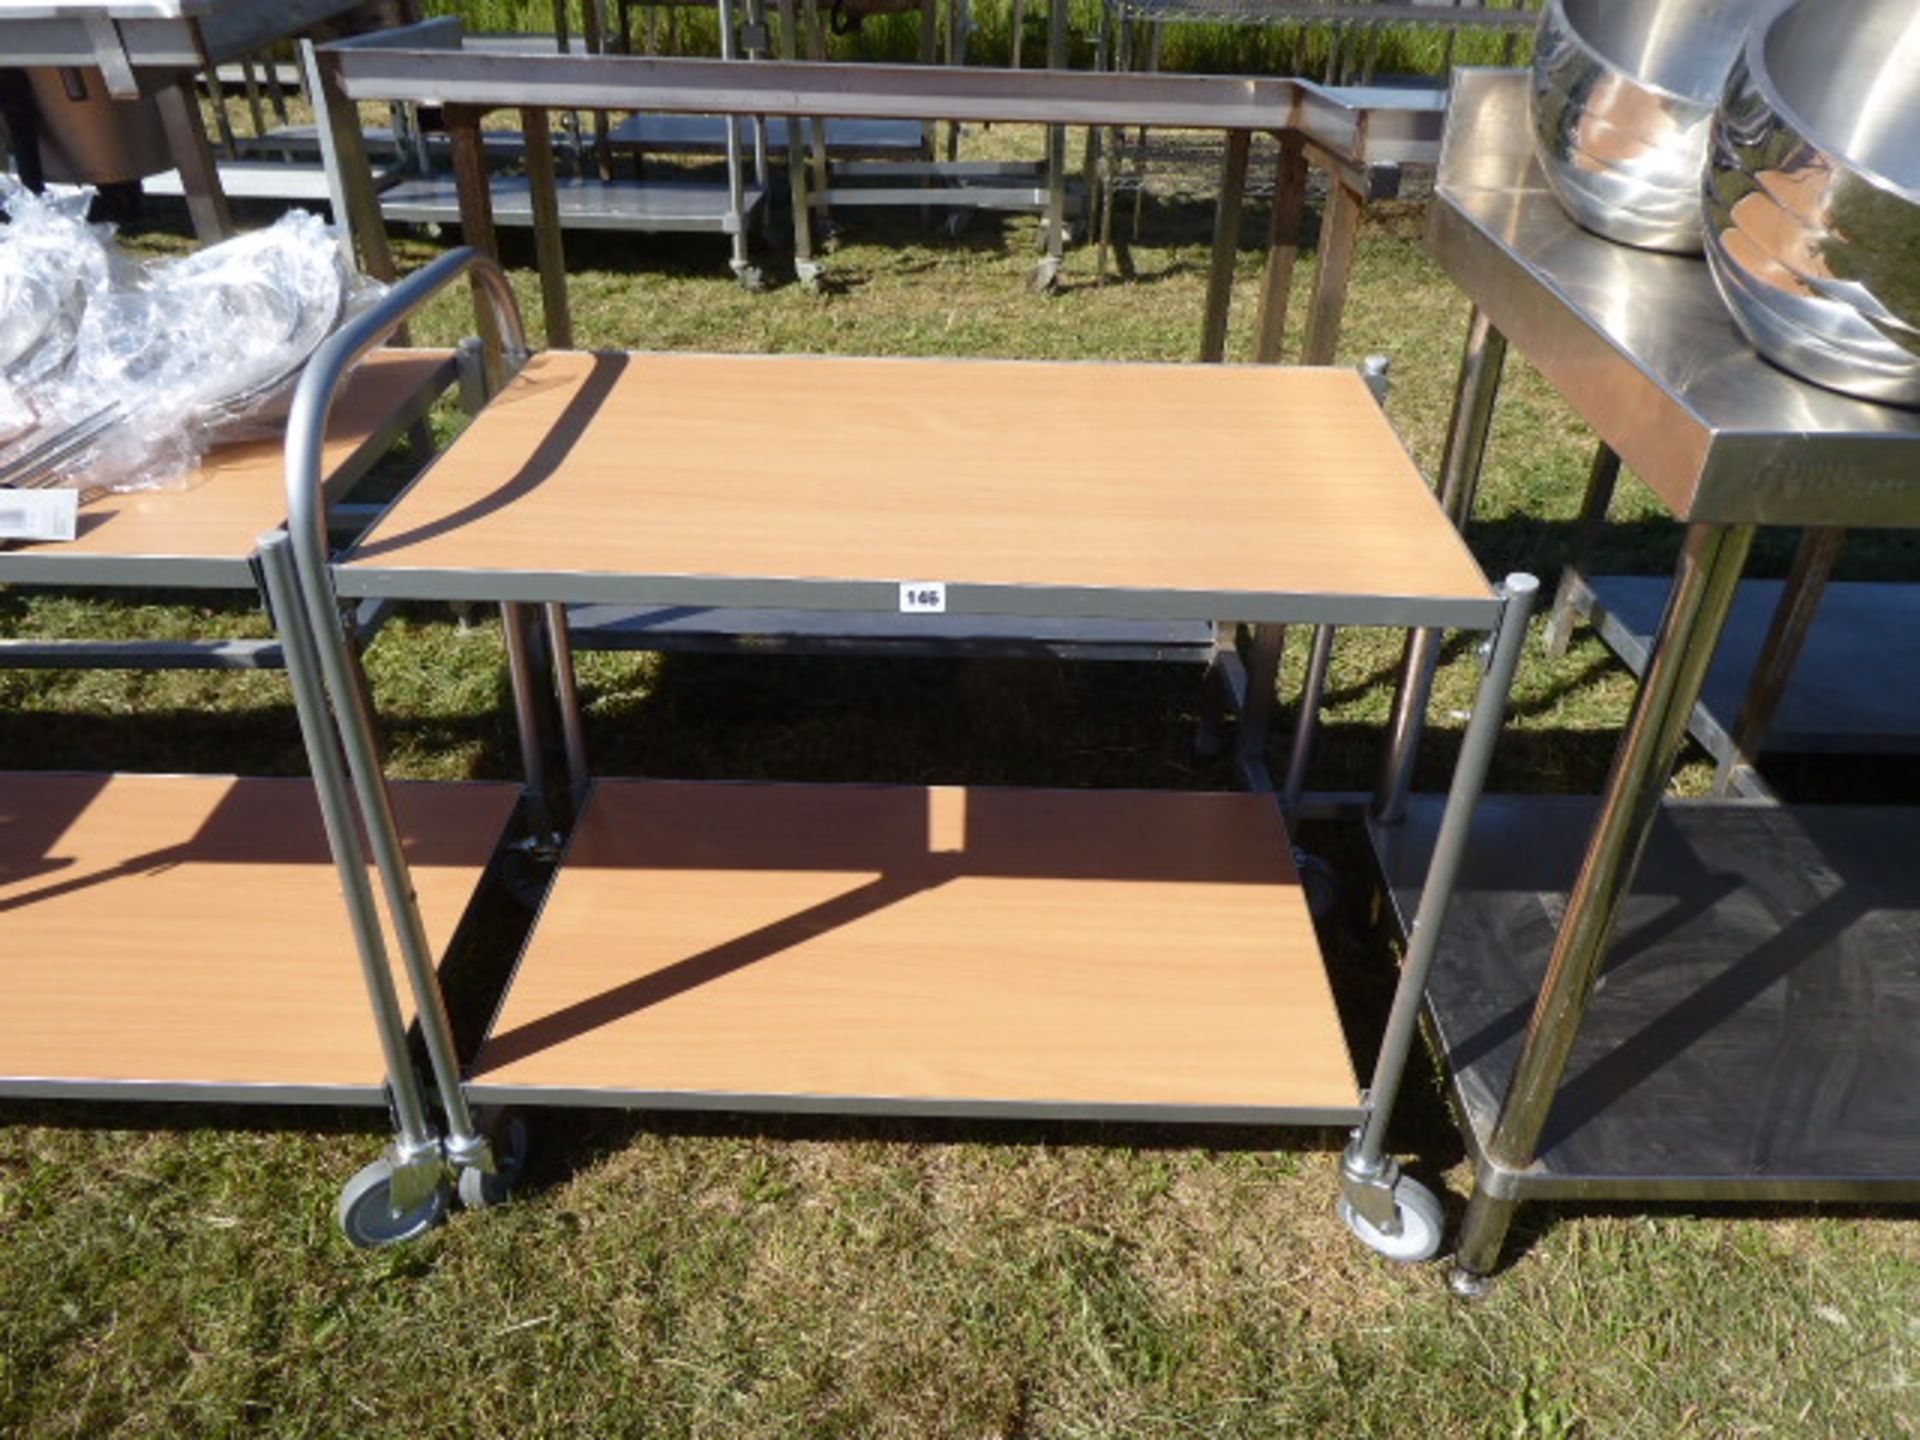 2 tier mobile catering trolly with metal tubular frame and wooden shelves, 850mm wide